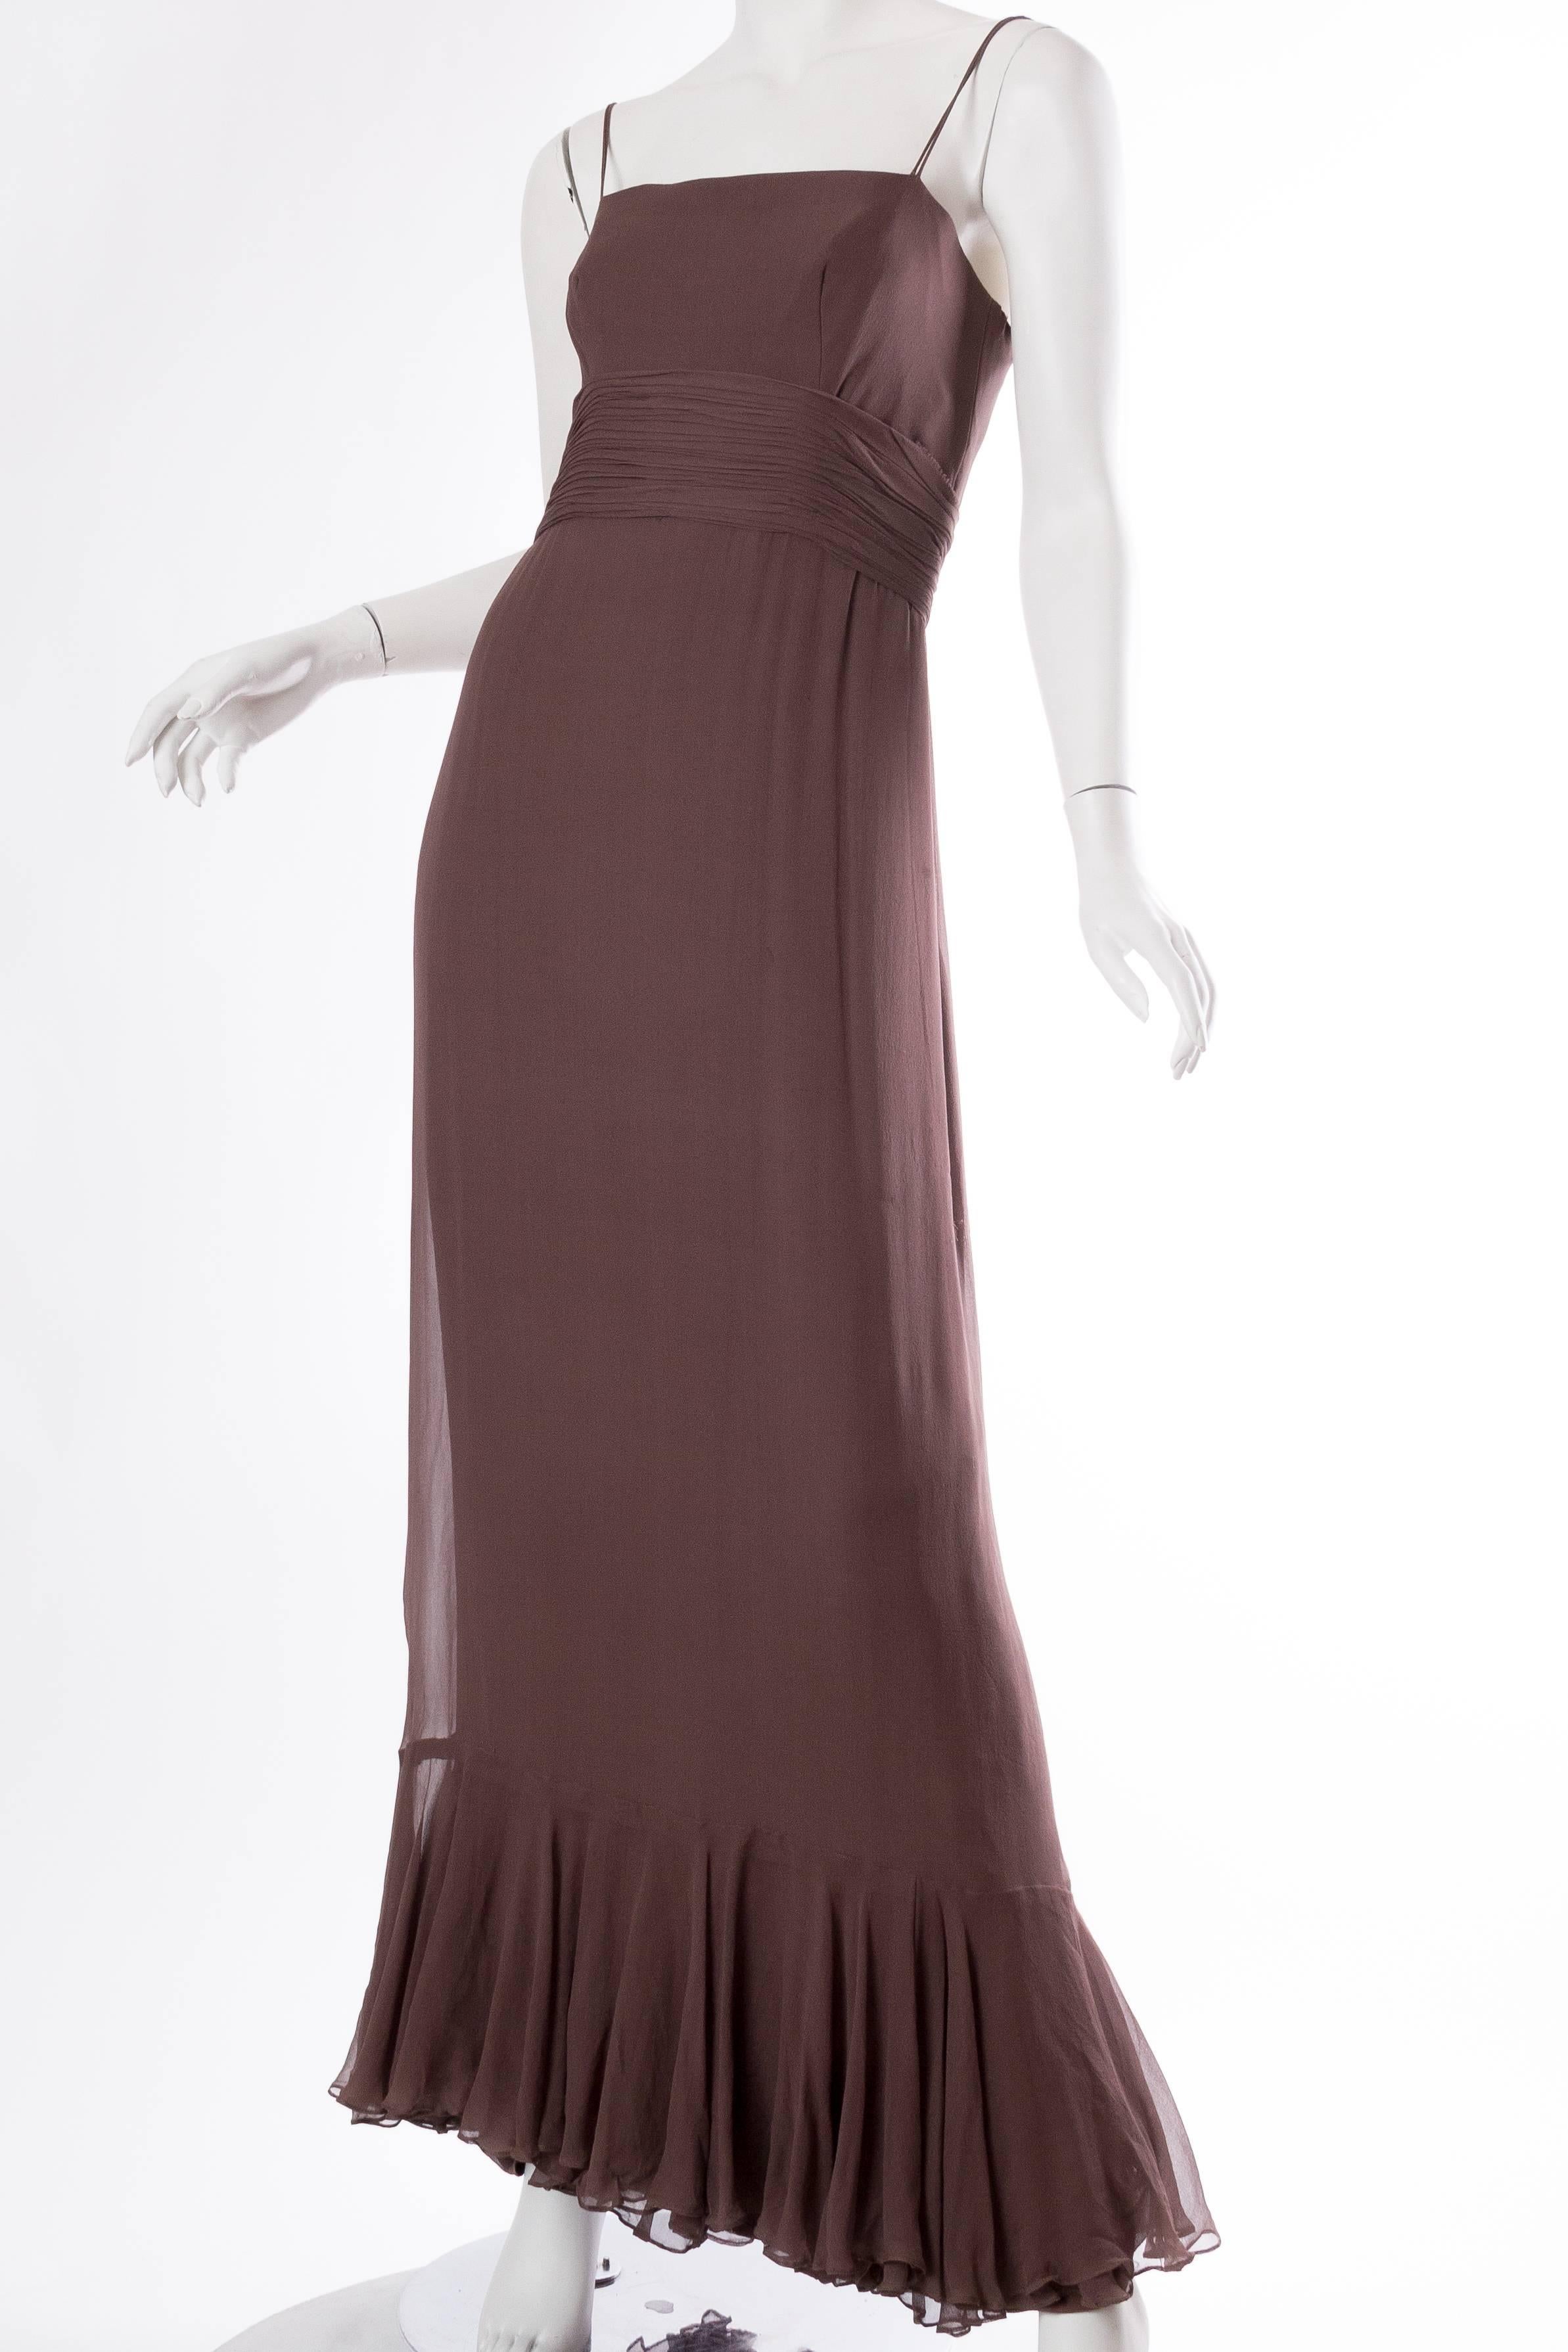 1970S MALCOLM STARR Chocolate Brown Silk Chiffon Boho Ruffled Gown For Sale 1